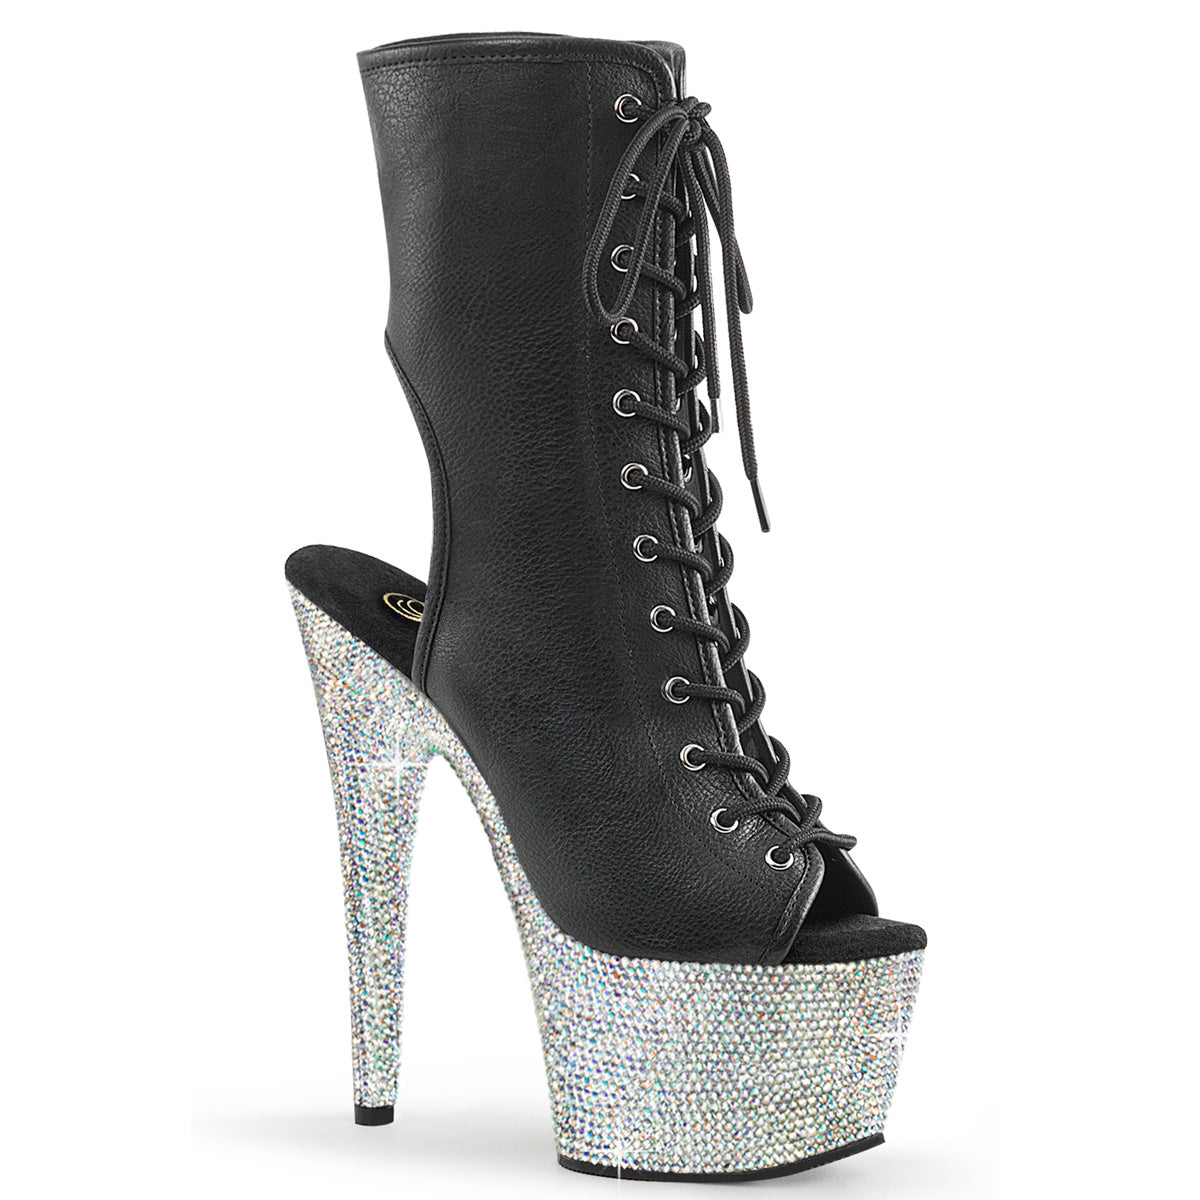 BEJEWELED-1016-7 Black Ankle Boots